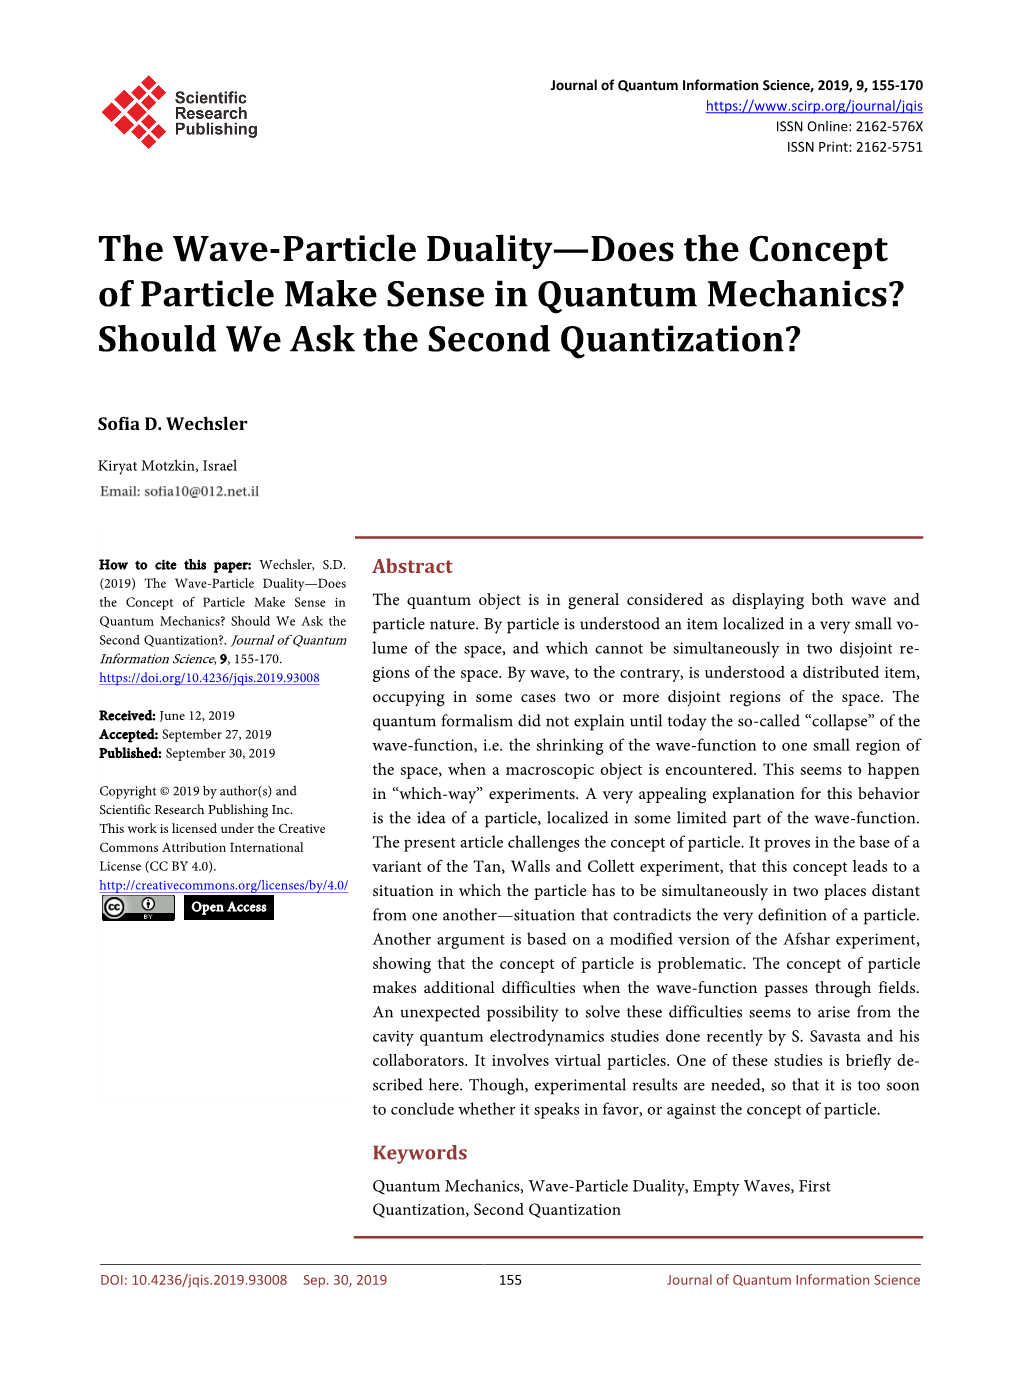 The Wave-Particle Duality—Does the Concept of Particle Make Sense in Quantum Mechanics? Should We Ask the Second Quantization?